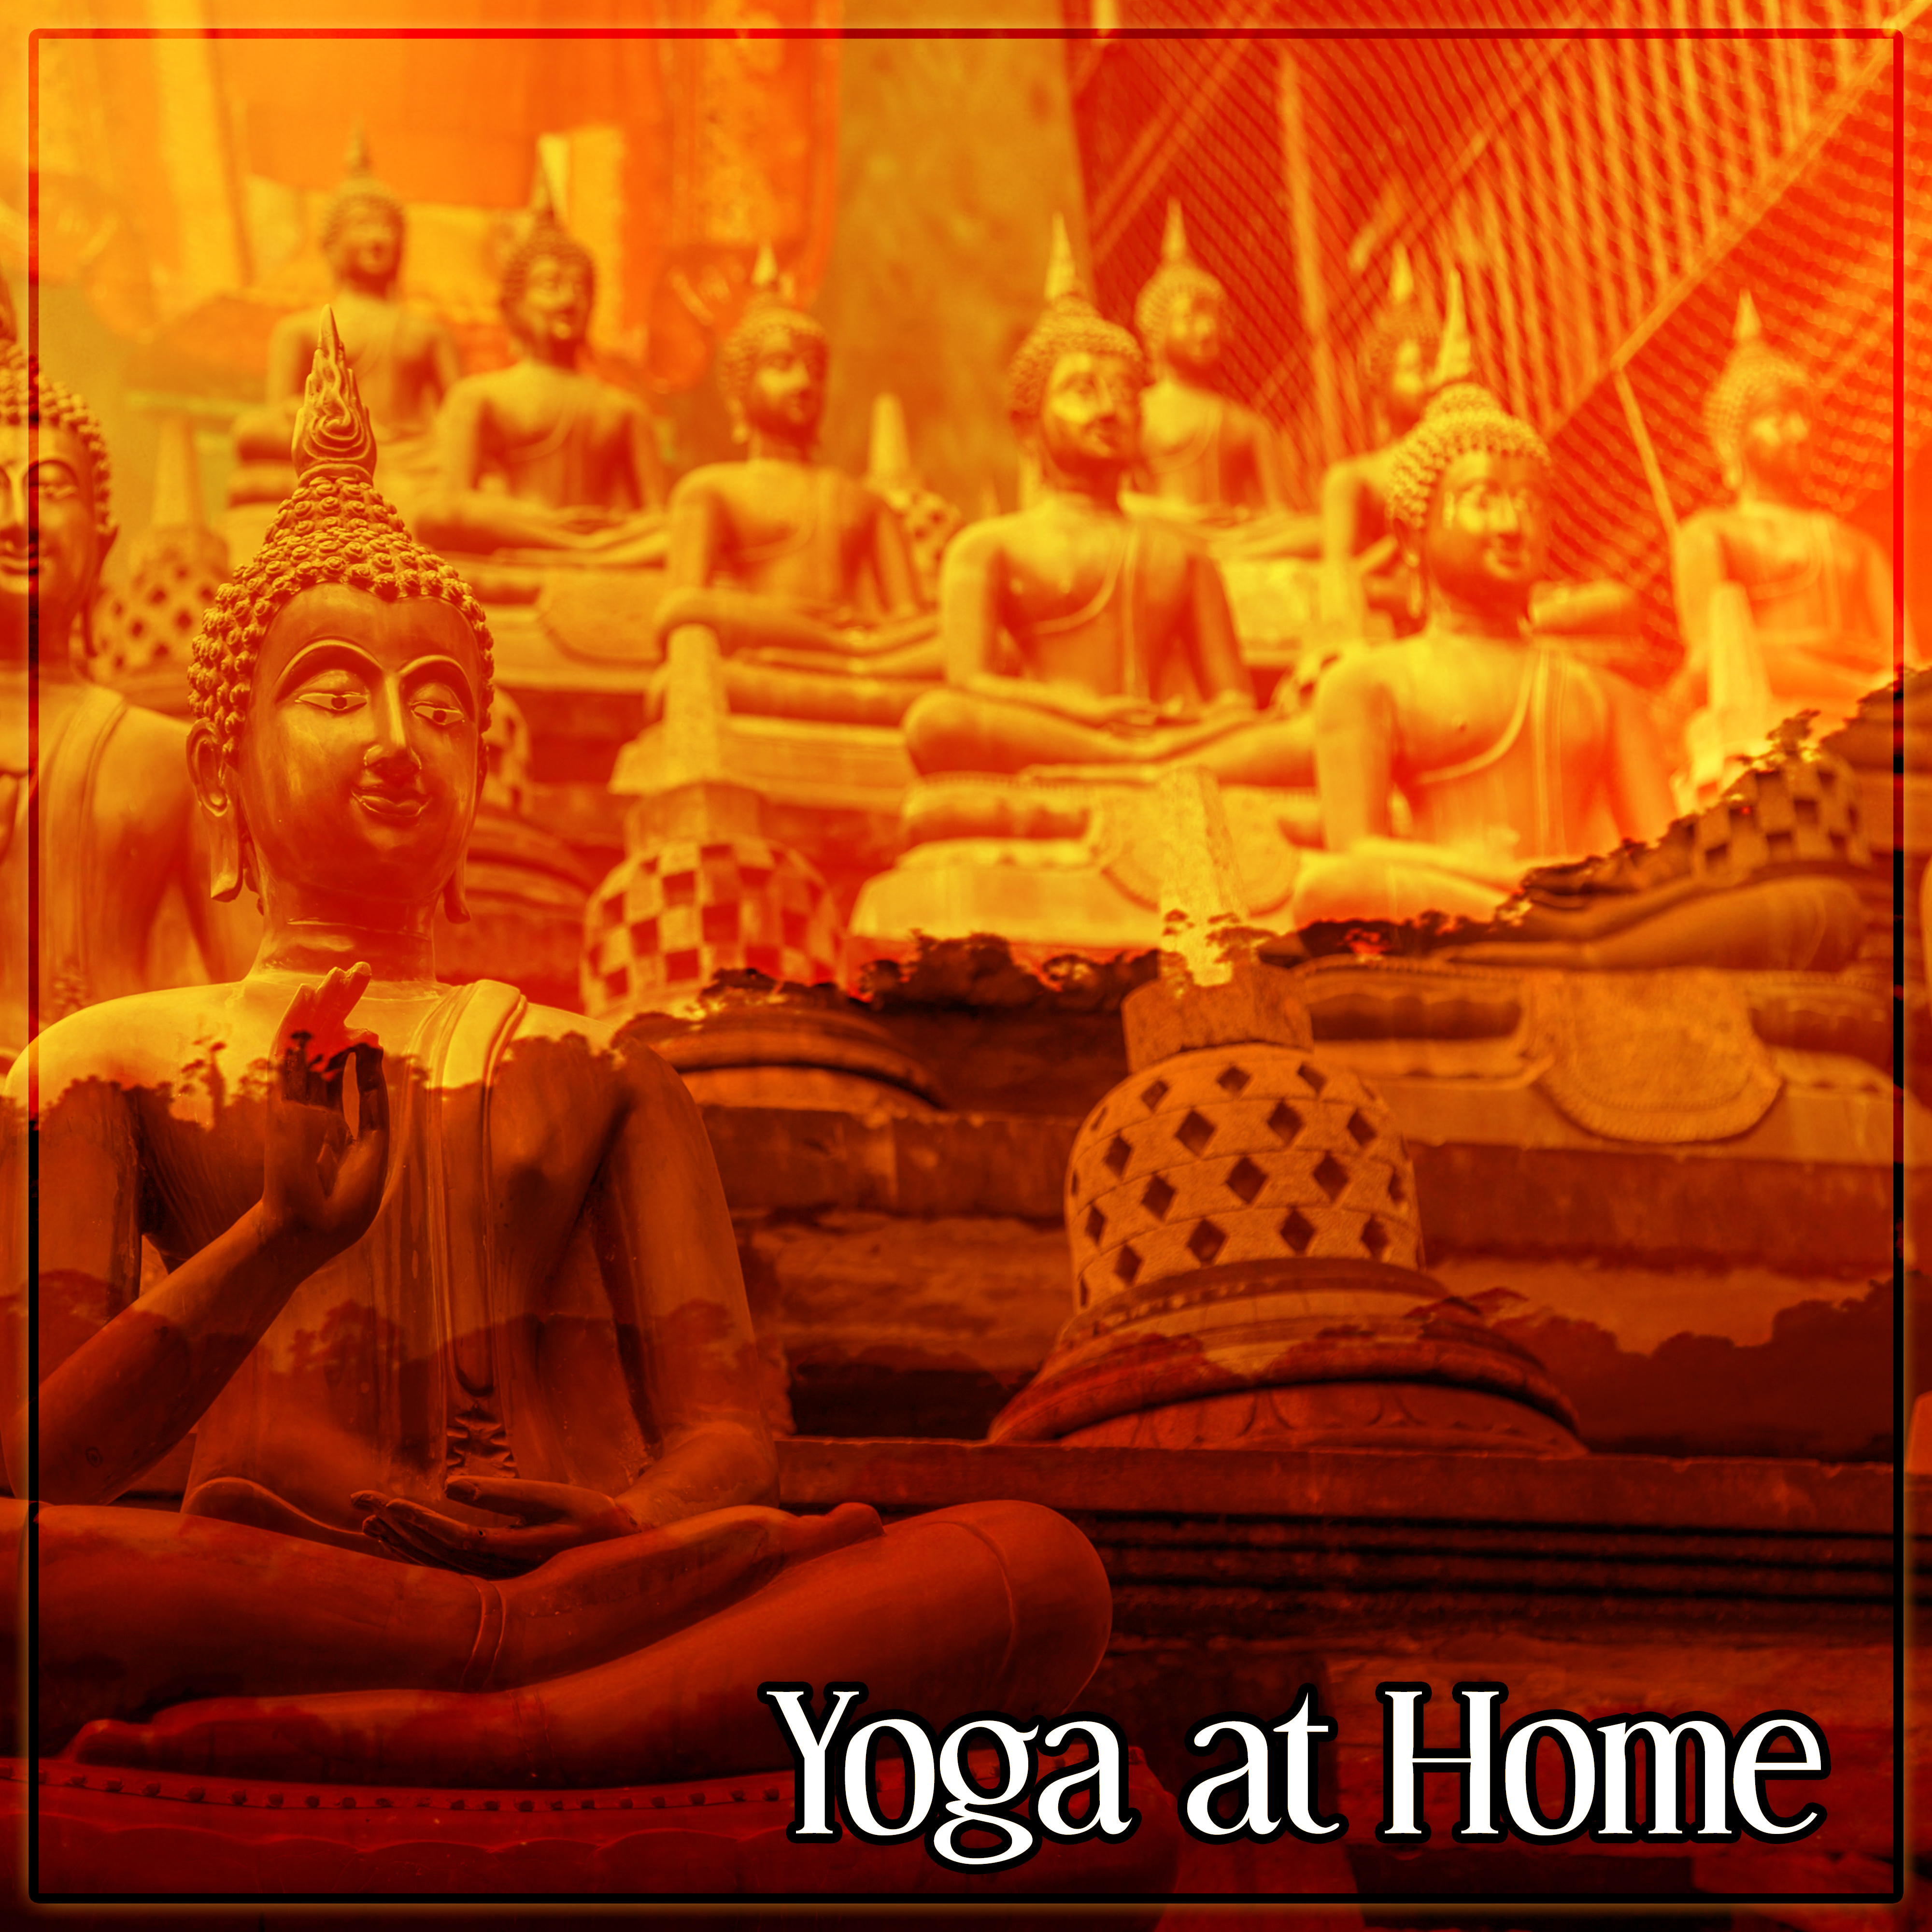 Yoga at Home – Spiritual Healing Sounds for Deep Focus on Meditation, Practise Yoga at Home, Relax Nature Sounds, Pure Meditation, Sleep